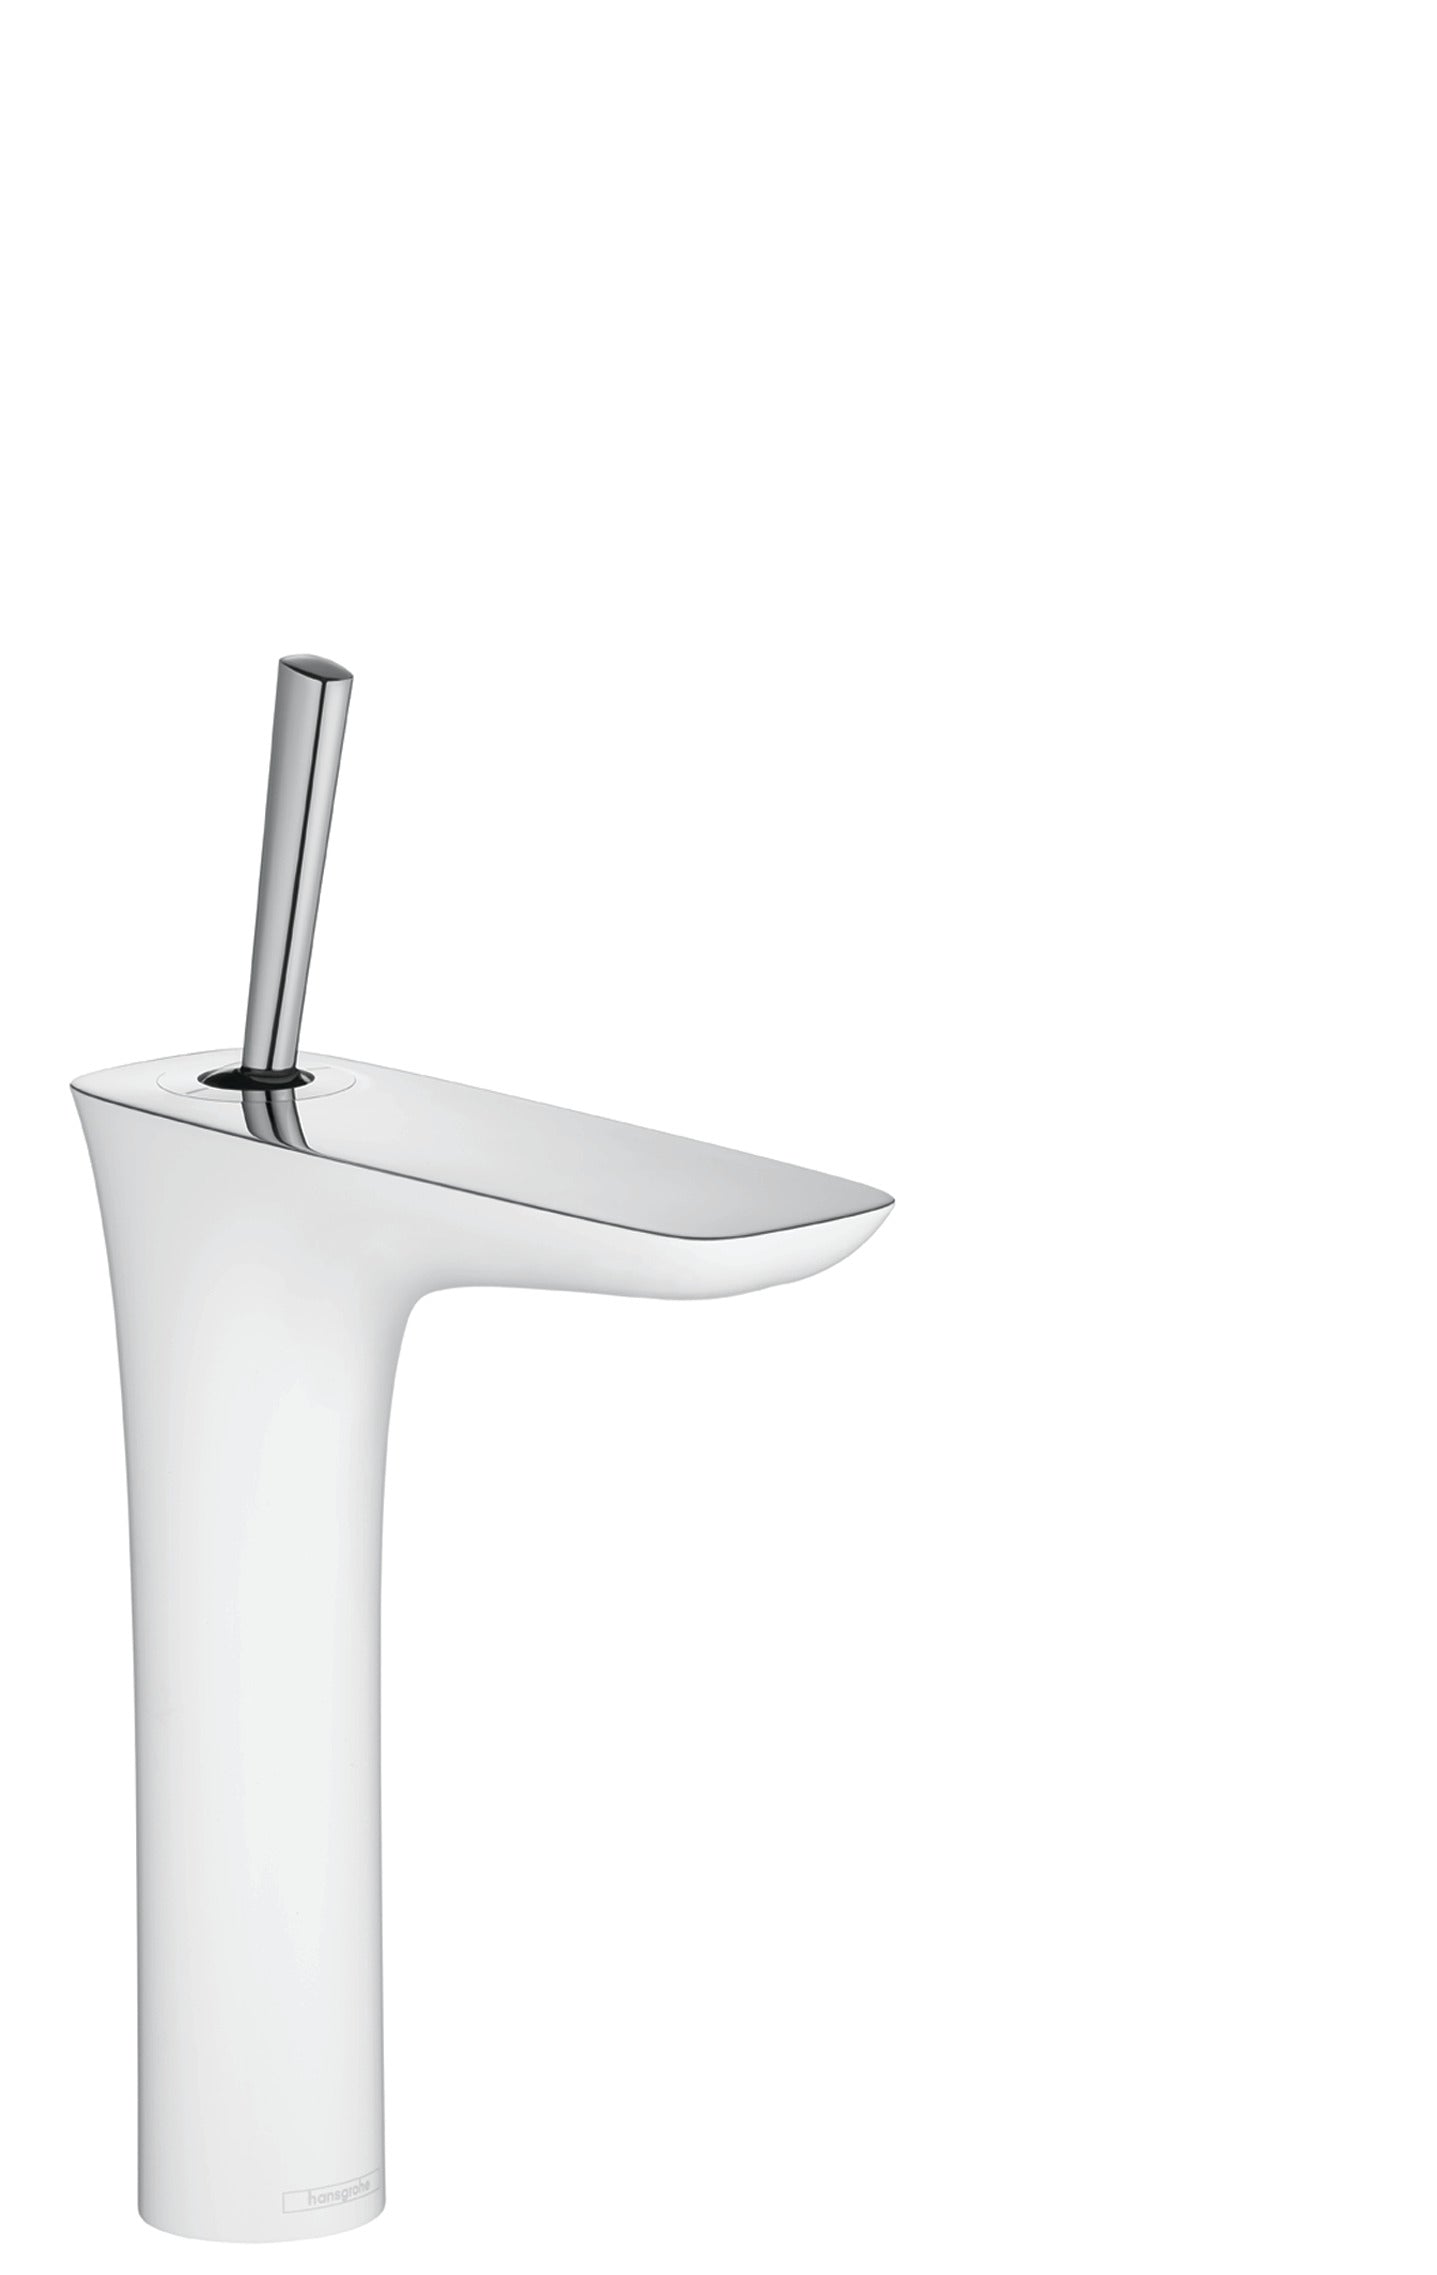 HANSGROHE 15081401 PuraVida Single-Hole Faucet 200, 1.2 GPM in White/Chrome